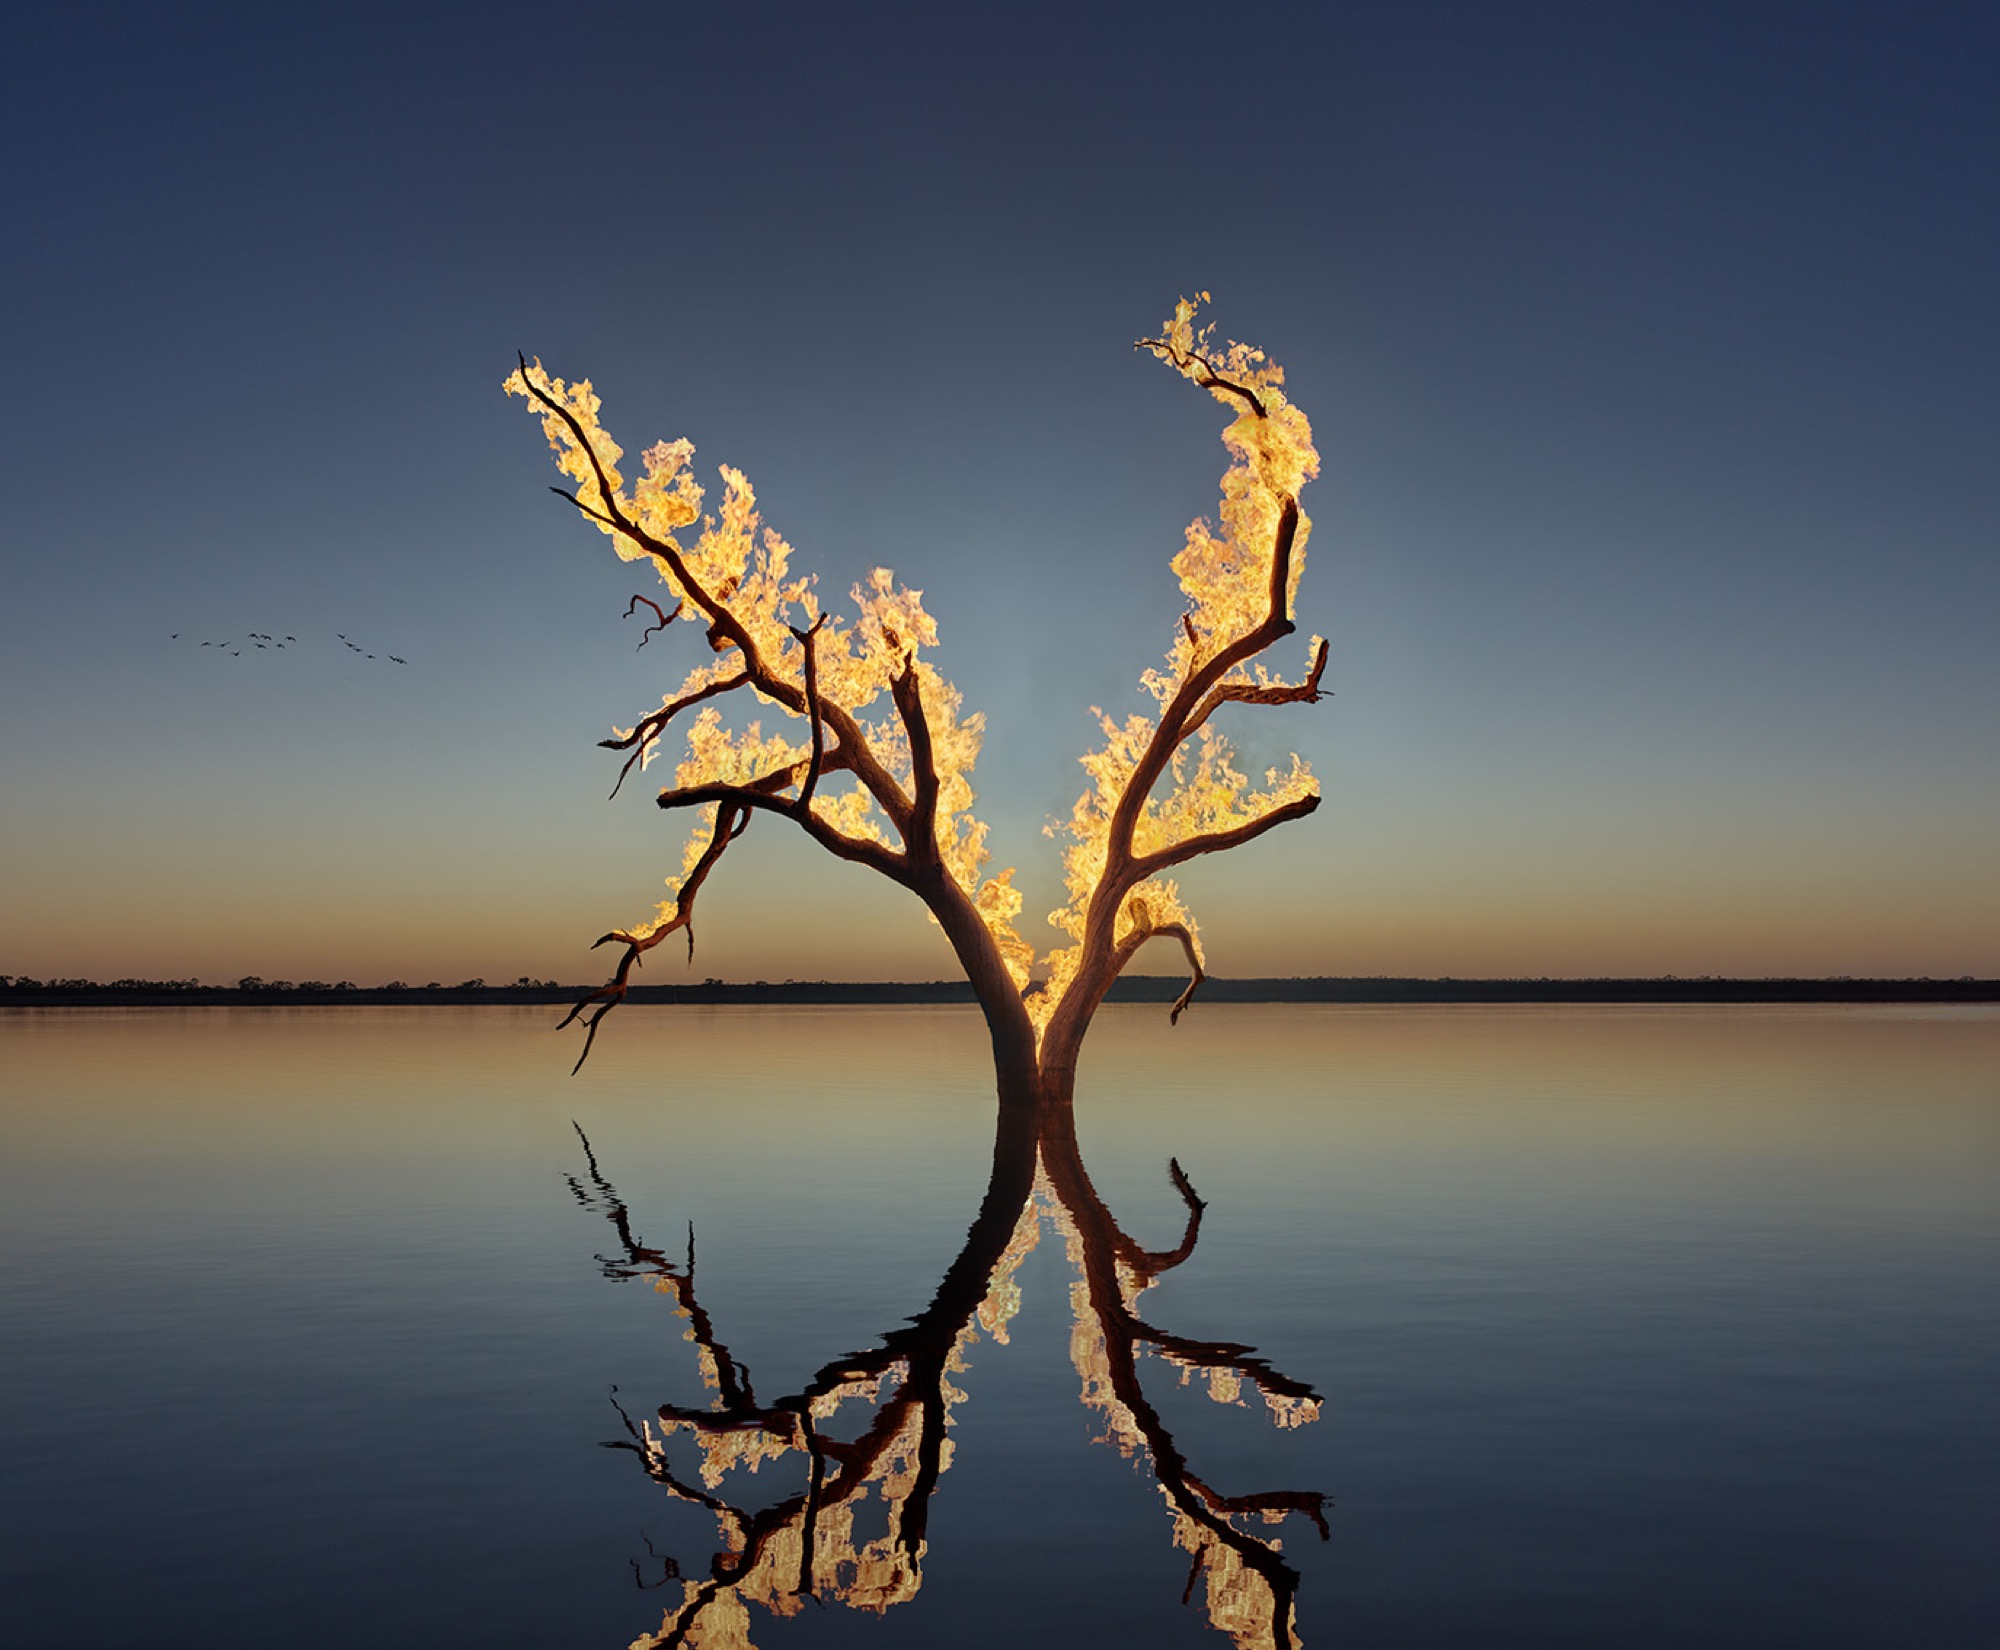 Murray Fredericks, <em>Blaze #22, Kangaroo Lake, Great Darling Anabranch</em>, 2023. Digital pigment print on cotton rag, edition of 7 + 2 A/P, 120 x 150 cm. Courtesy of the artist and ARC ONE Gallery